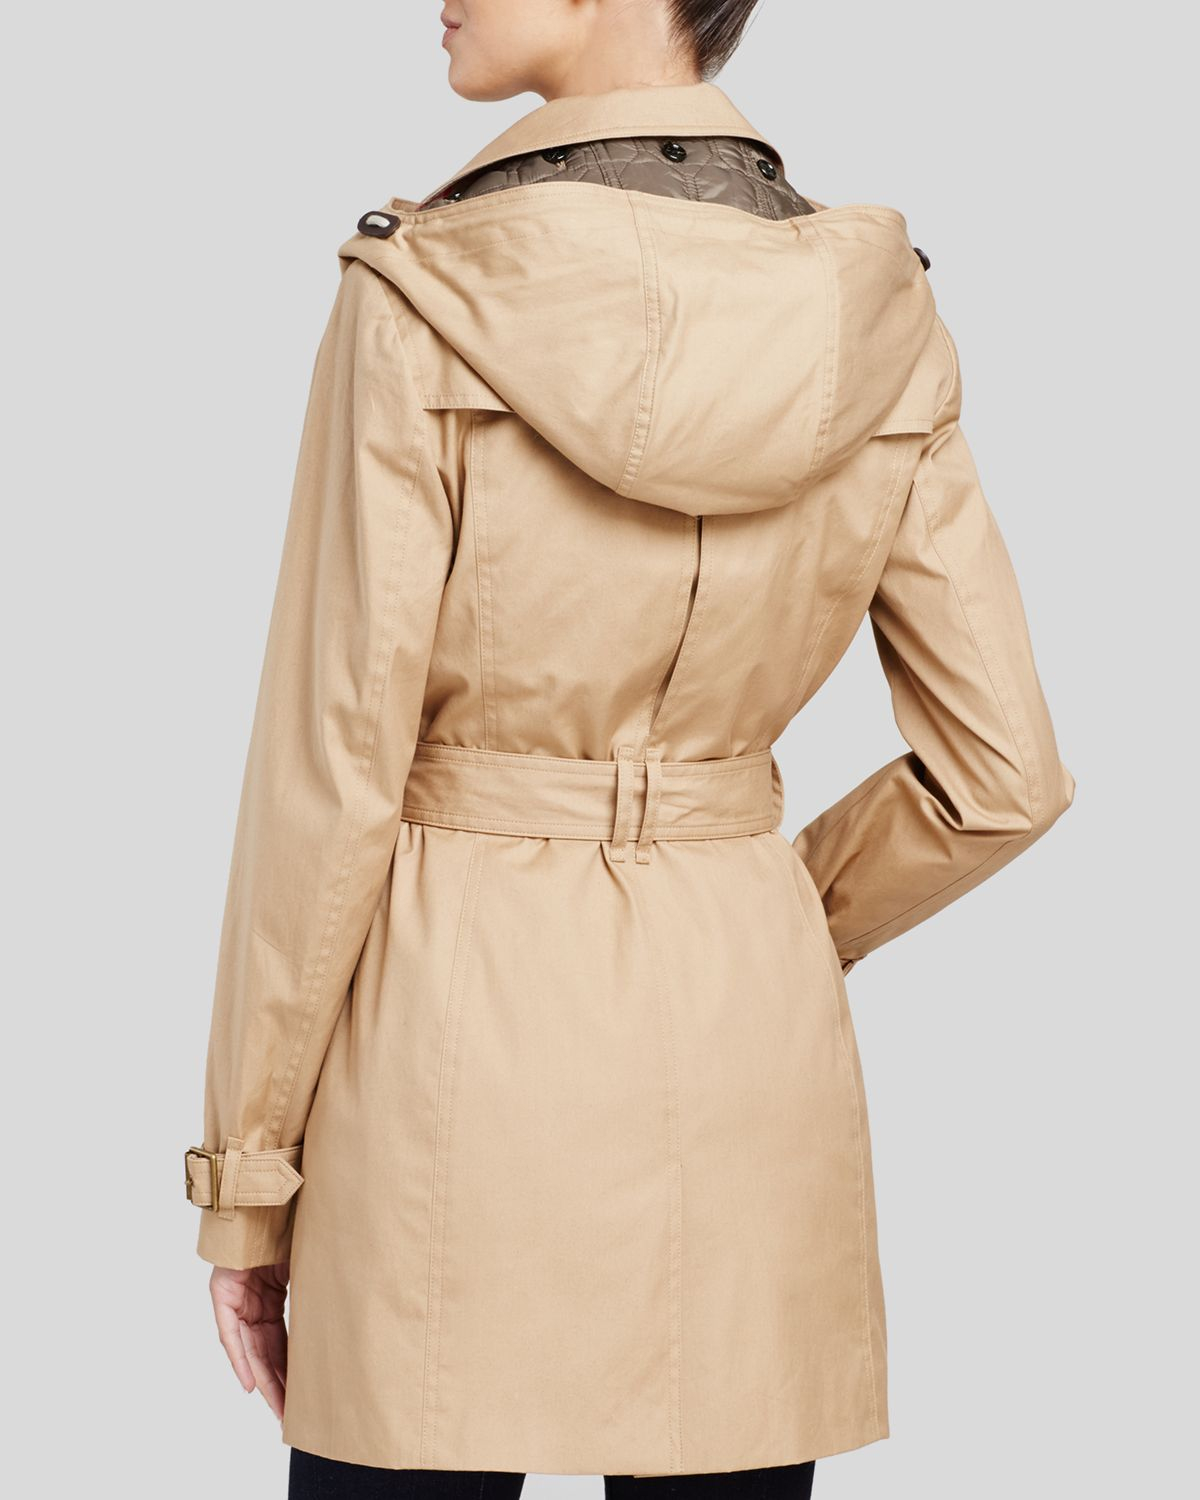 Burberry brit Reymoore Hooded Cotton Trench Coat in Beige (Light Camel ...